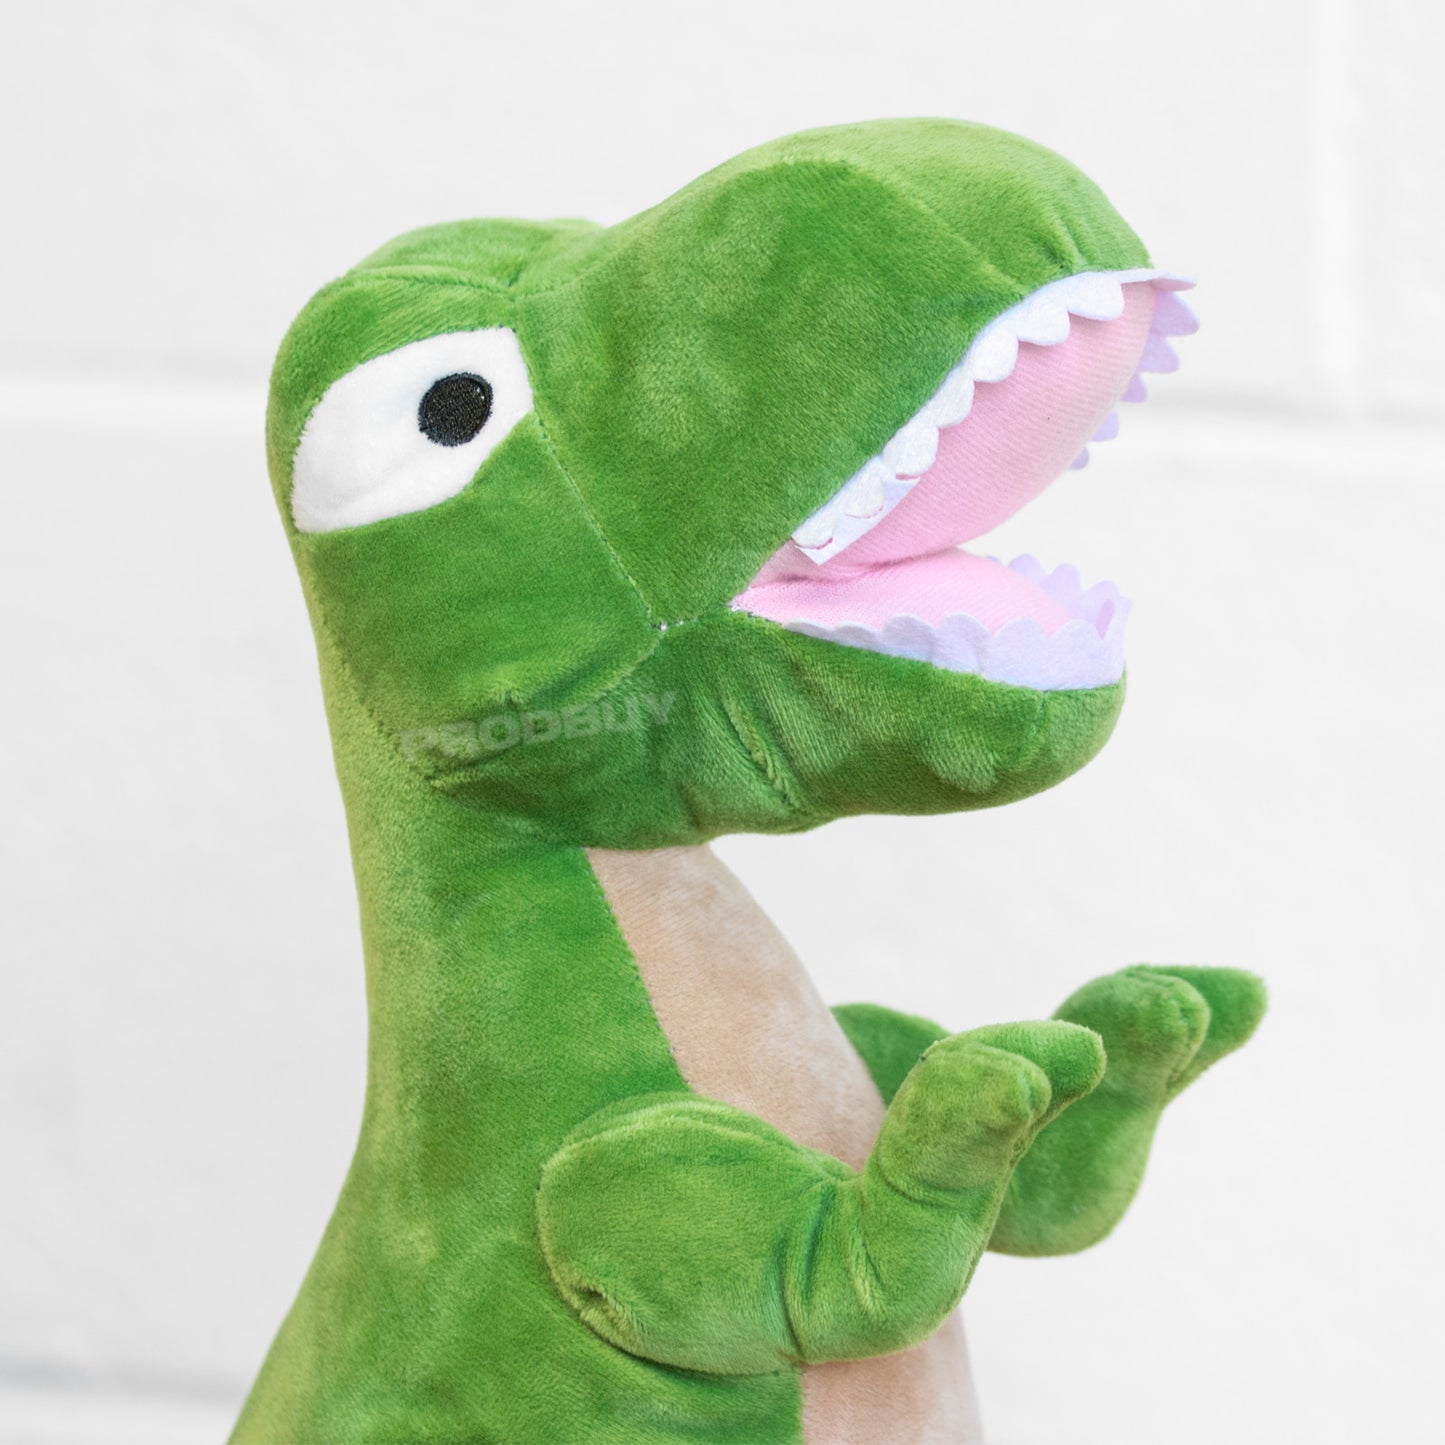 Dinosaur Door Stop Heavy 1.5kg Weighted Fabric Novelty Stopper